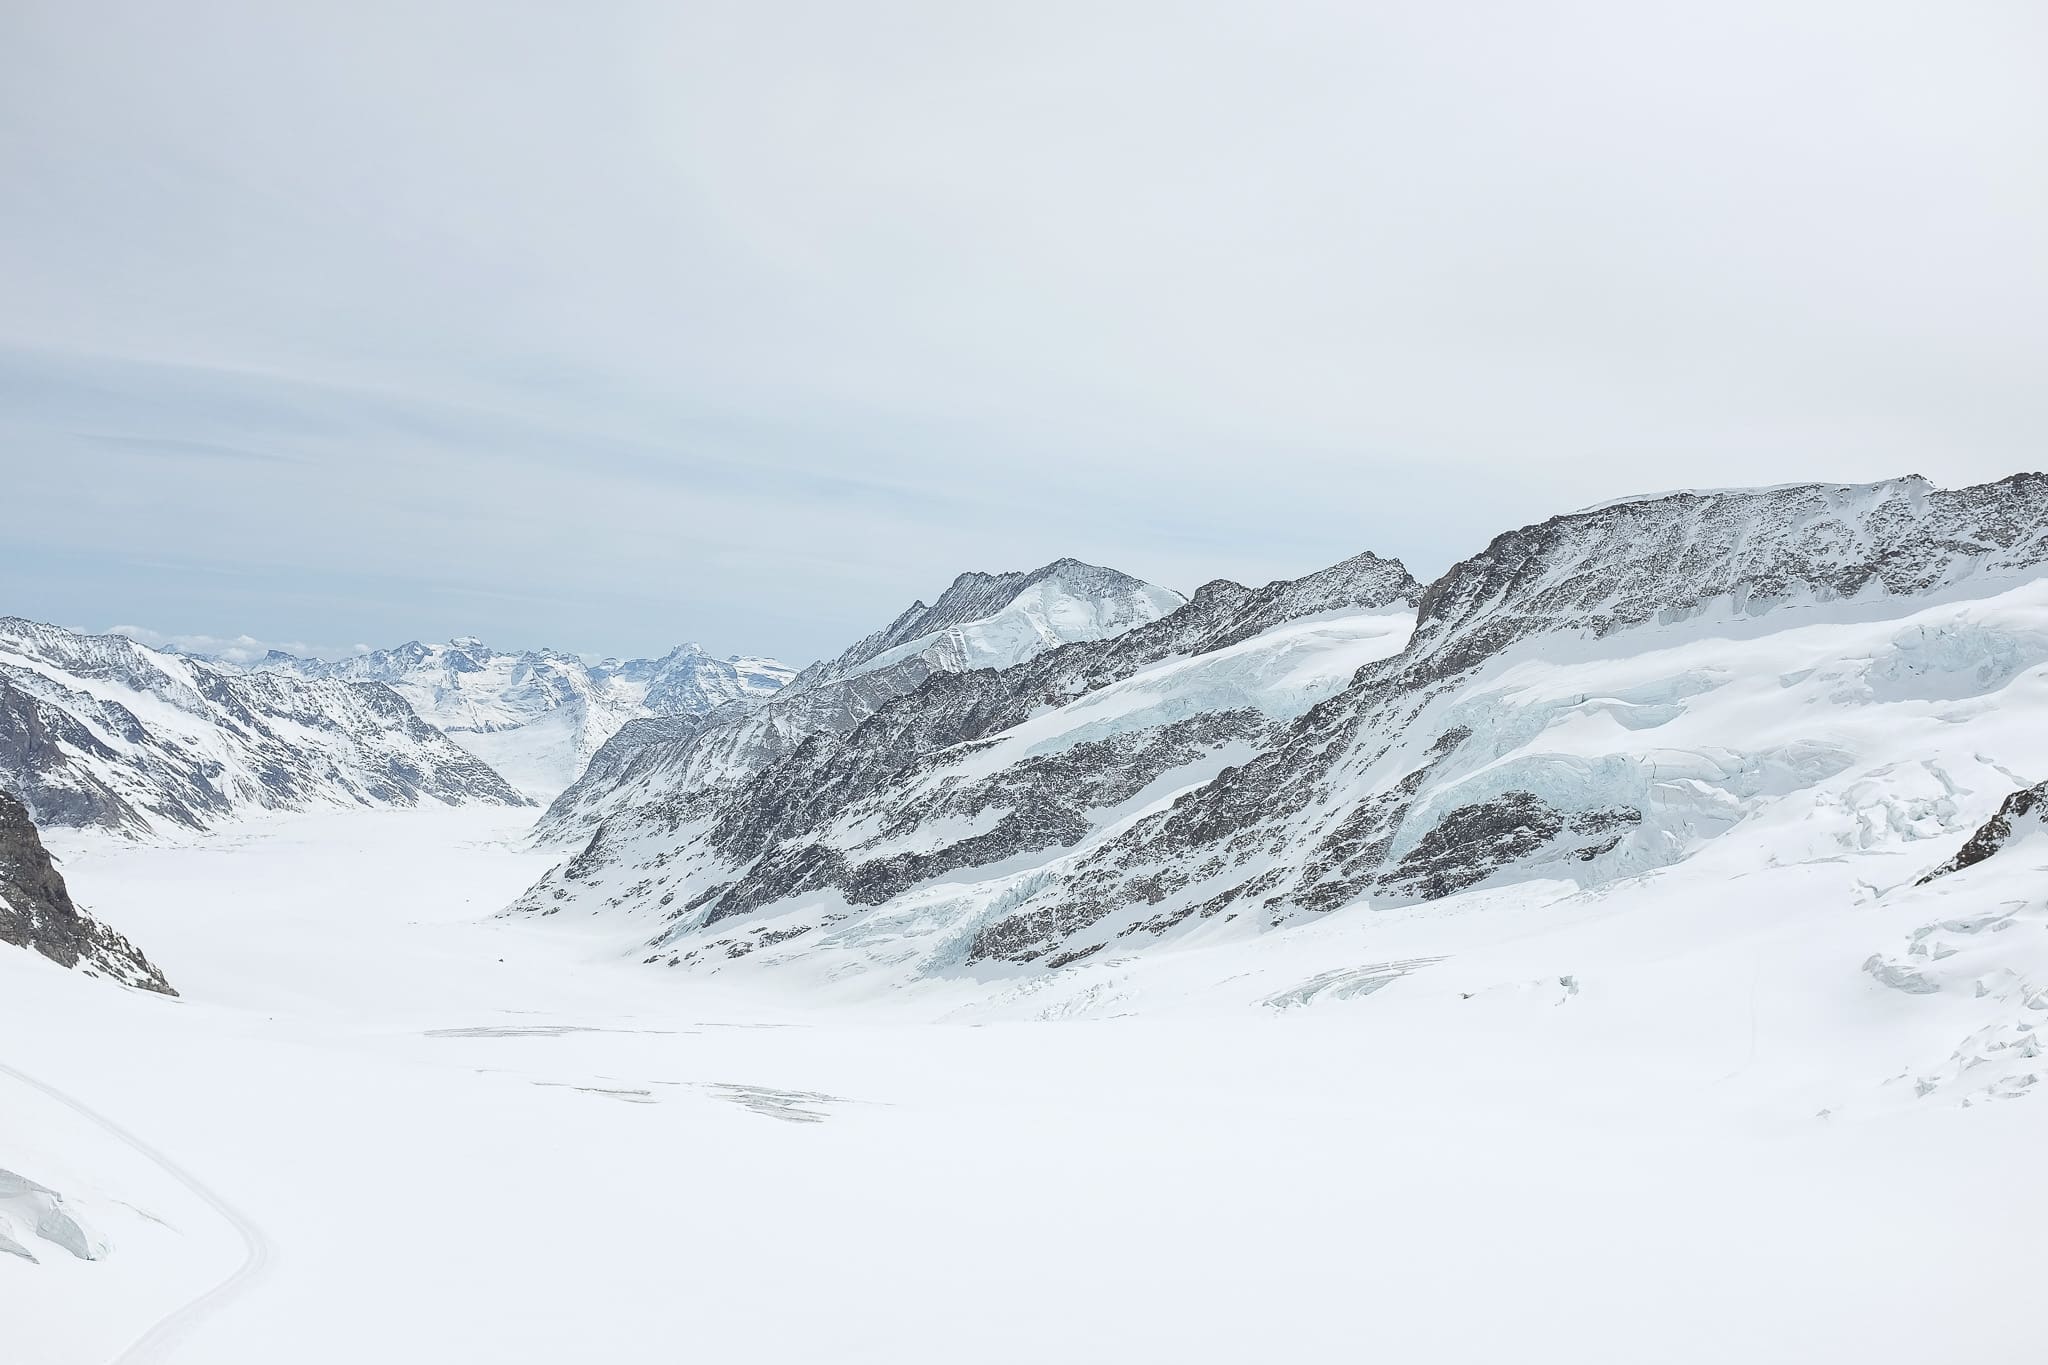 view of the Aletsch Glacier from the Jungfraujoch